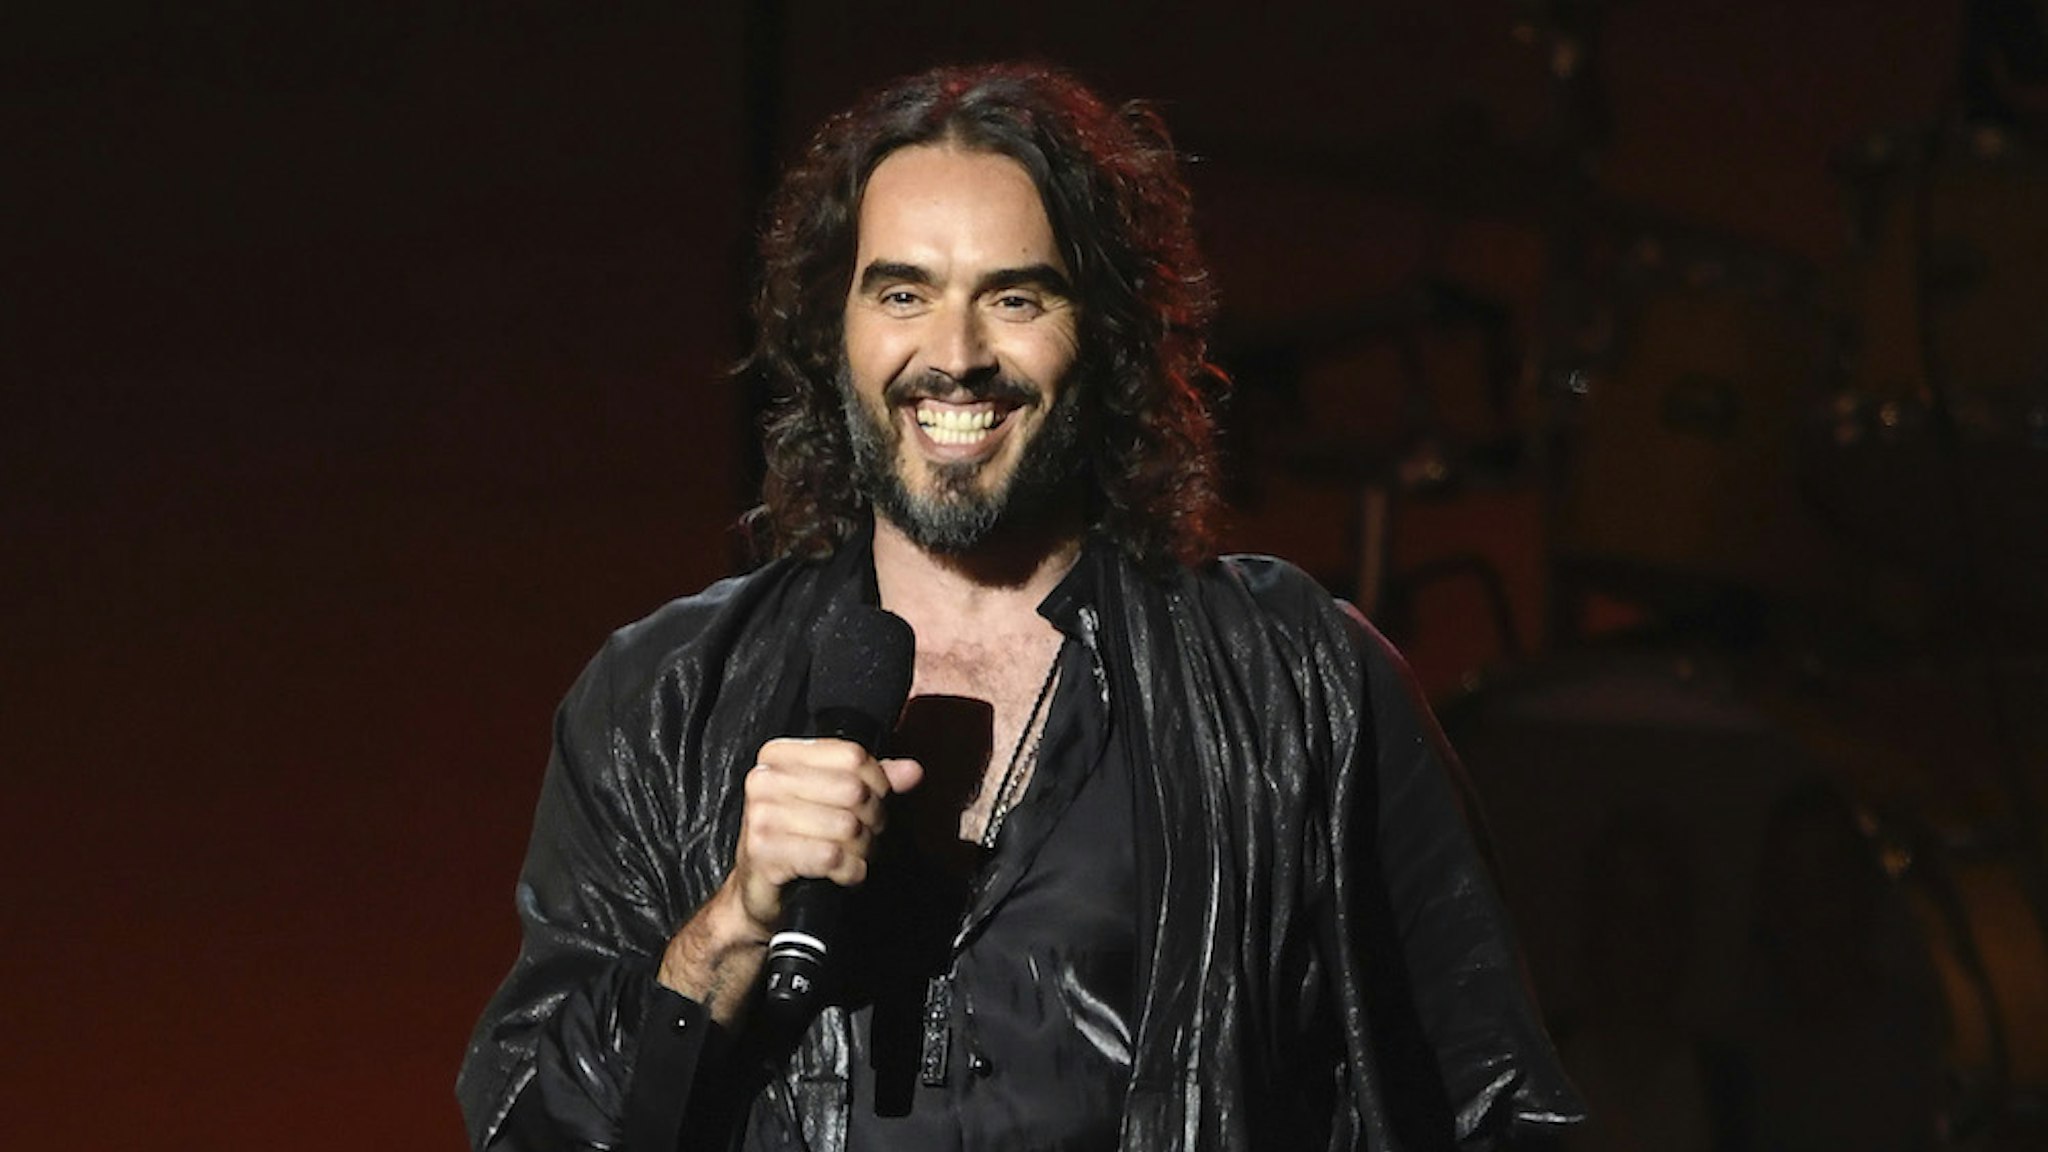 LOS ANGELES, CALIFORNIA - JANUARY 24: (EDITORS NOTE: Retransmission with alternate crop.) Russell Brand speaks onstage during MusiCares Person of the Year honoring Aerosmith at West Hall at Los Angeles Convention Center on January 24, 2020 in Los Angeles, California. (Photo by Kevork Djansezian/Getty Images for The Recording Academy)